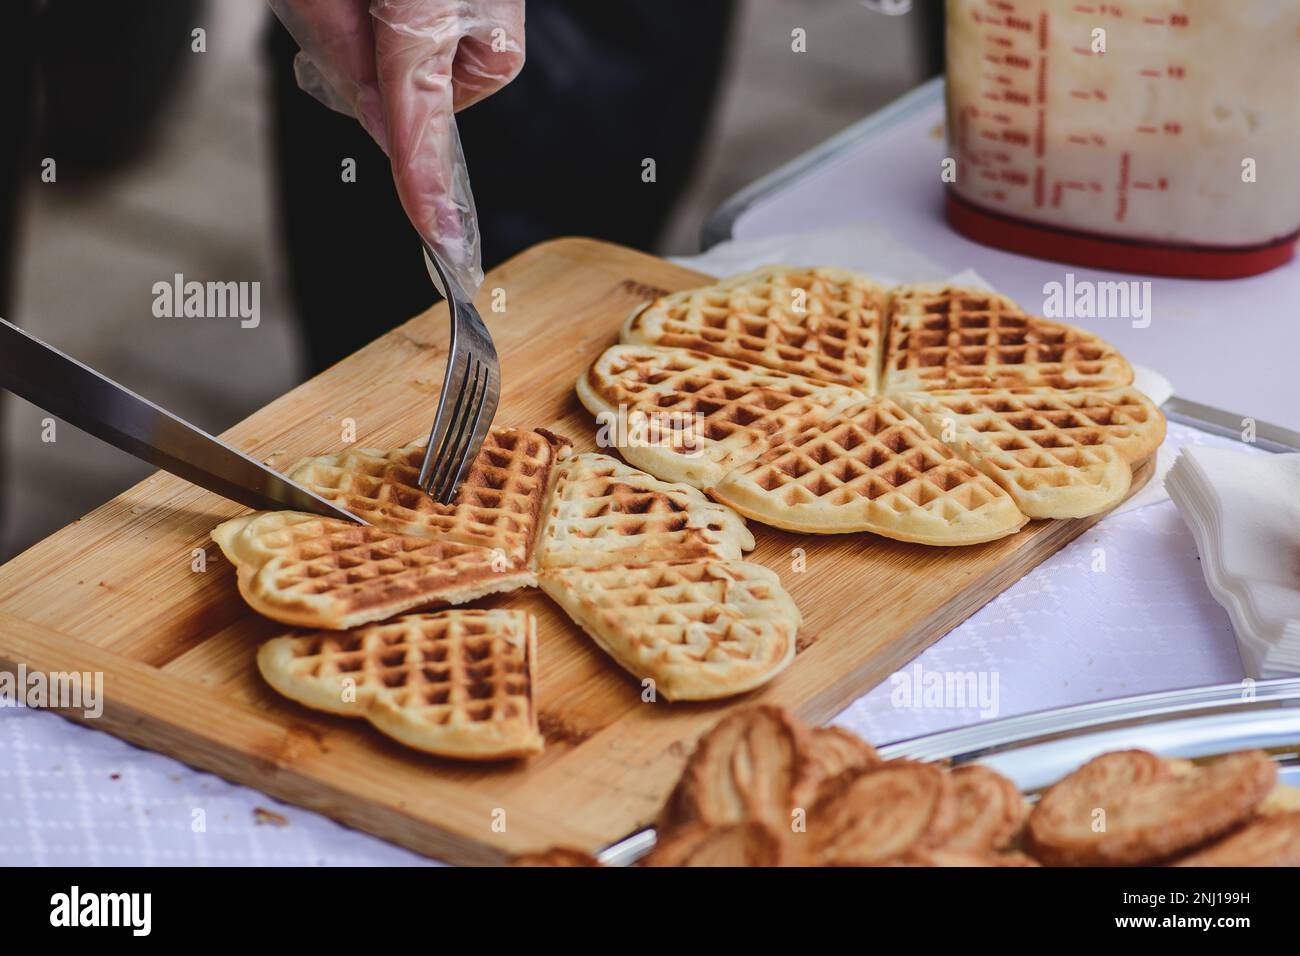 Preparing waffle or waffles, dish made from leavened butter or dough that is cooked between two plates that are patterned to give a characteristic siz Stock Photo